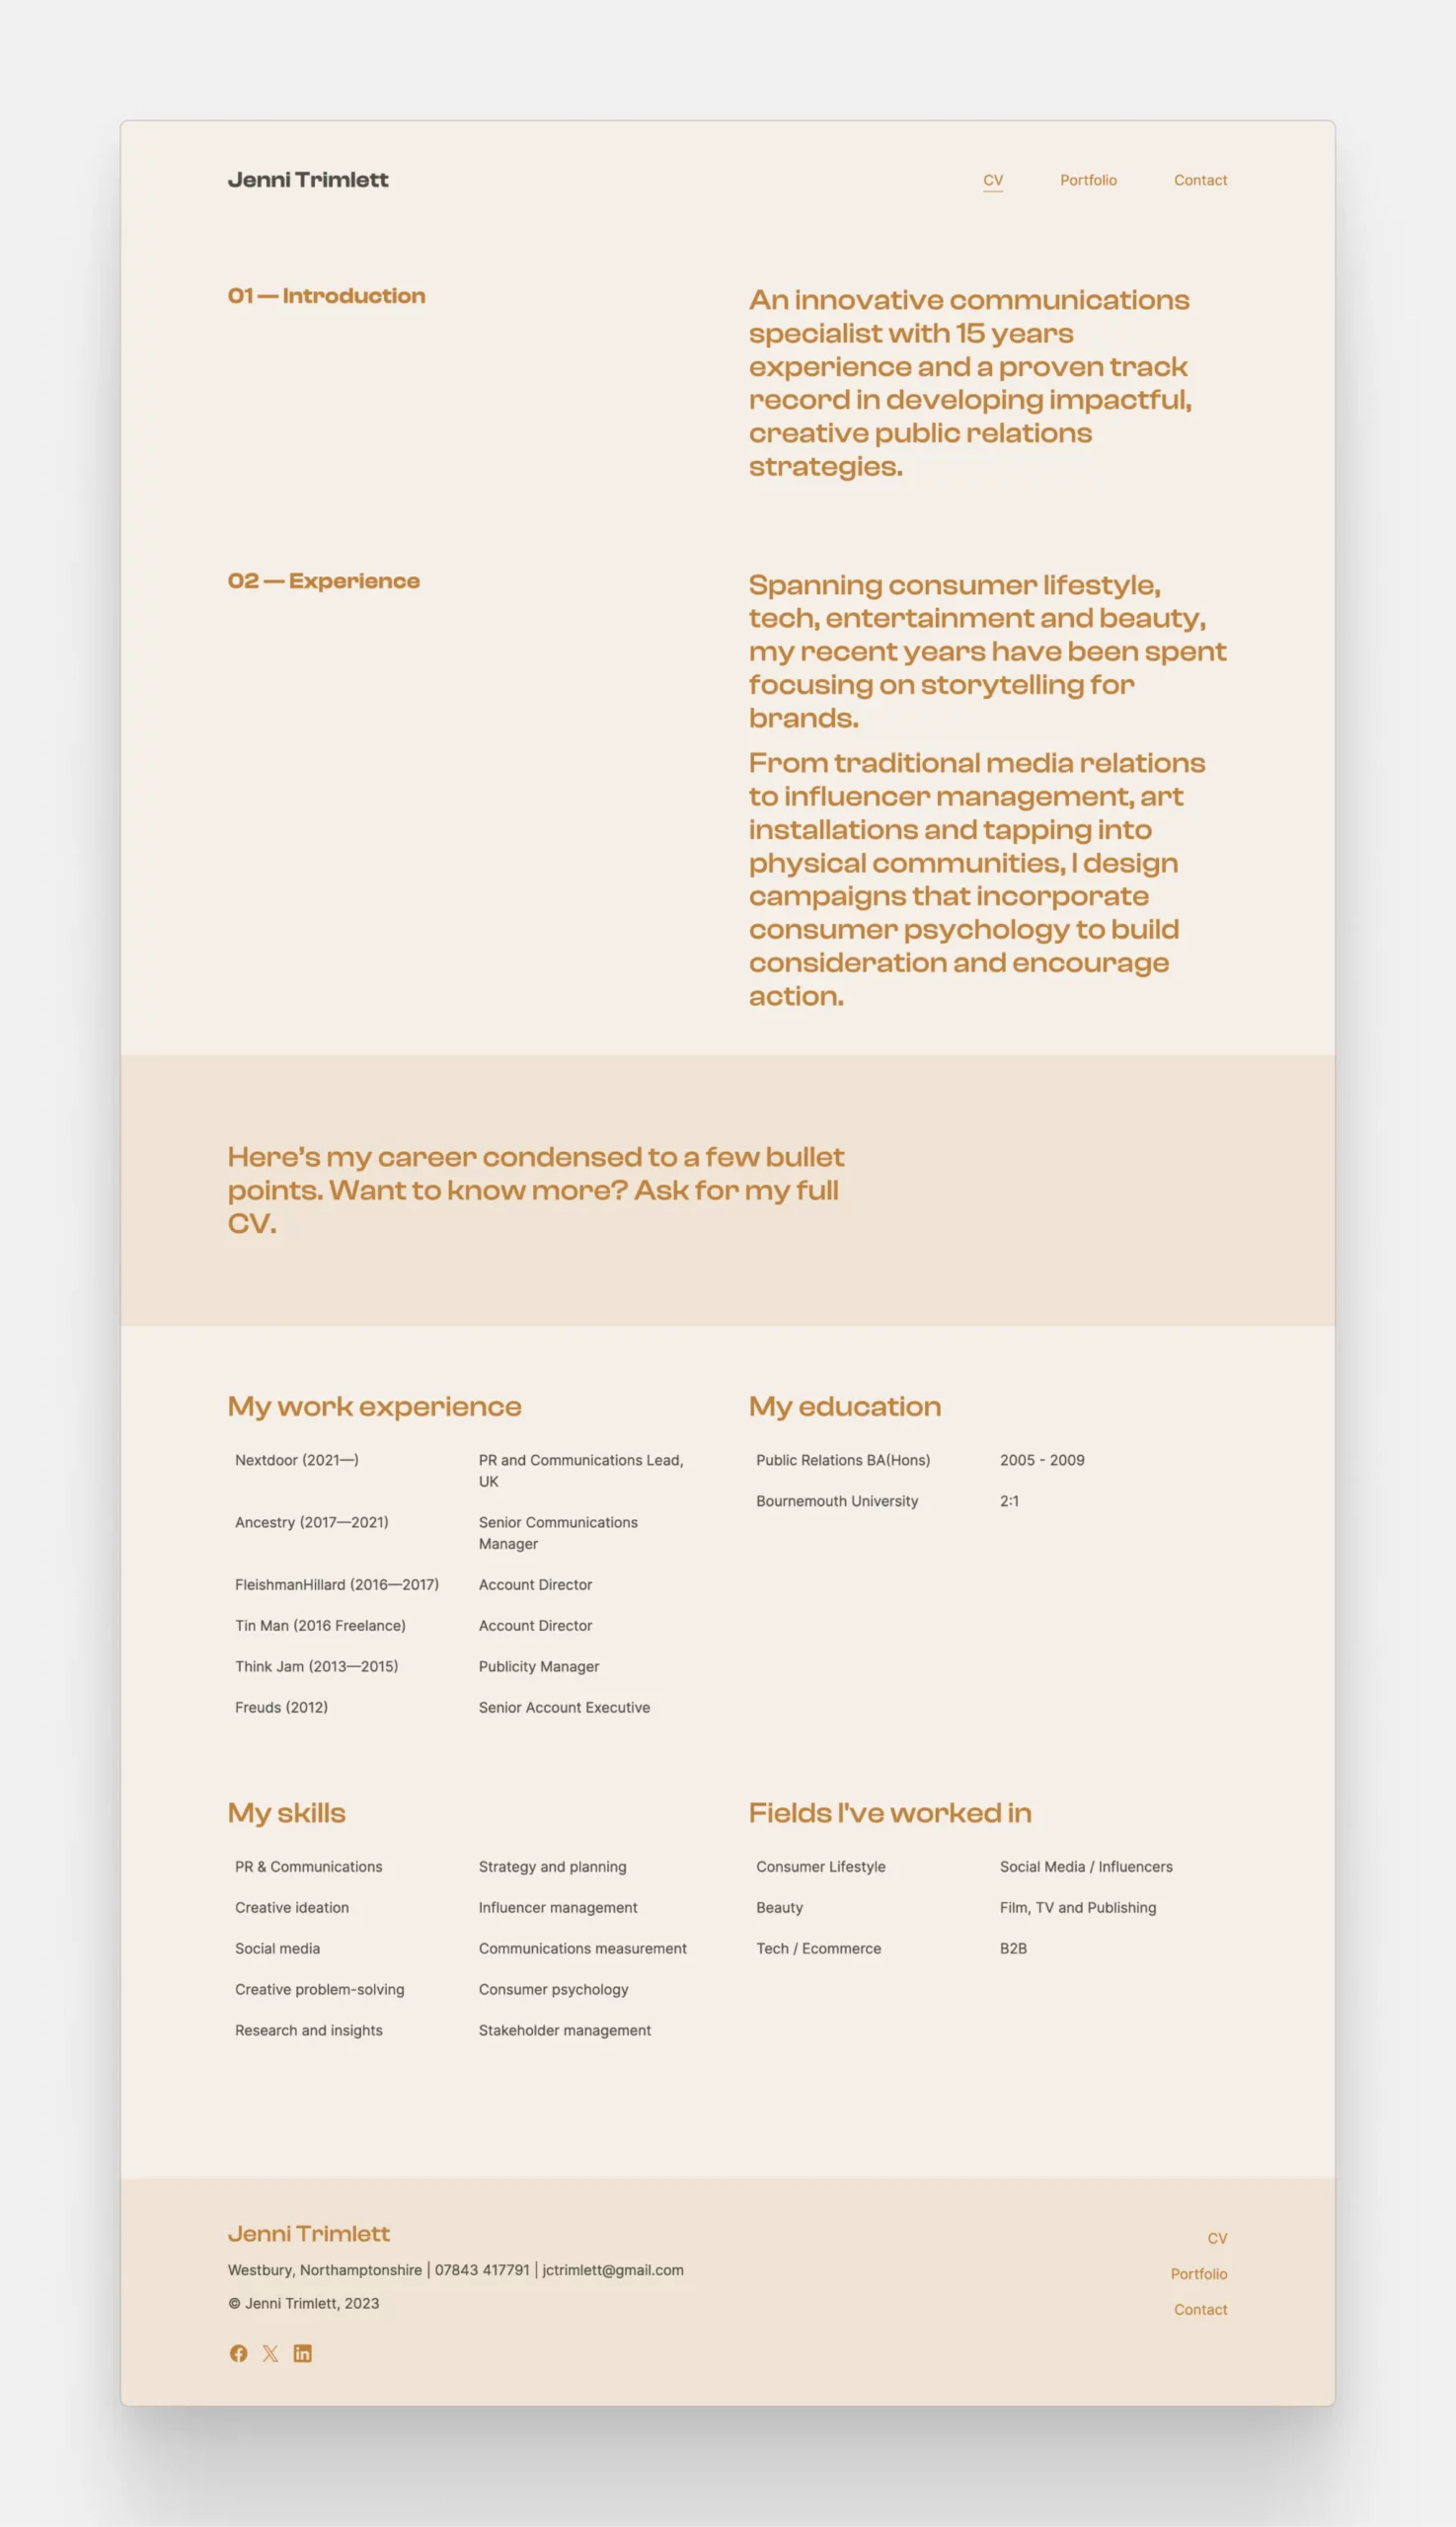 The resume of Jenni Trimlett, displayed natively on her Copyfolio website, showcasing her expertise and background in PR